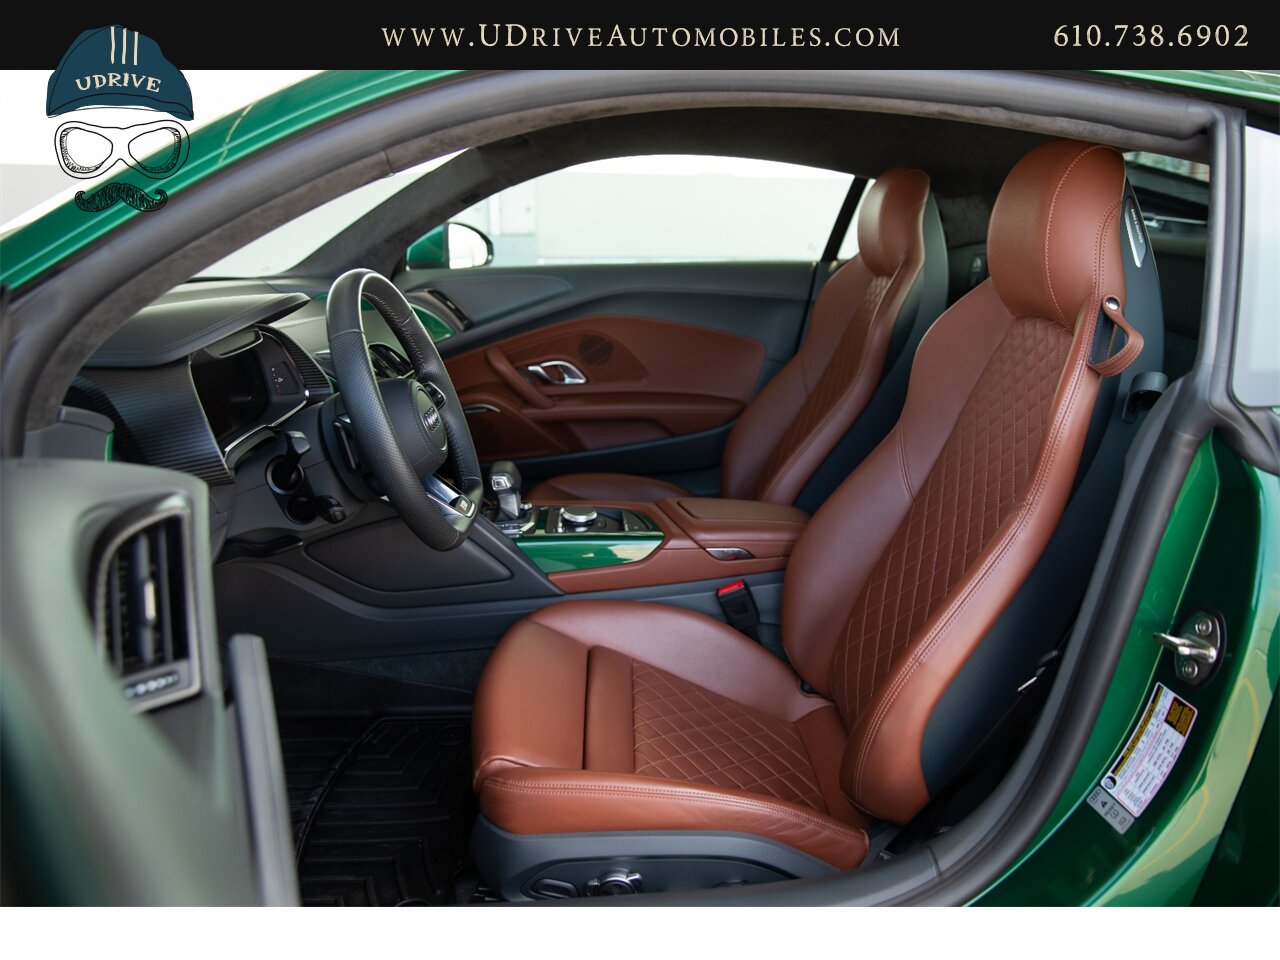 2017 Audi R8 Audi Exclusive Avocado Green Vermont Brown Leather  Diamond Stitching V10 Carbon Fiber - Photo 7 - West Chester, PA 19382